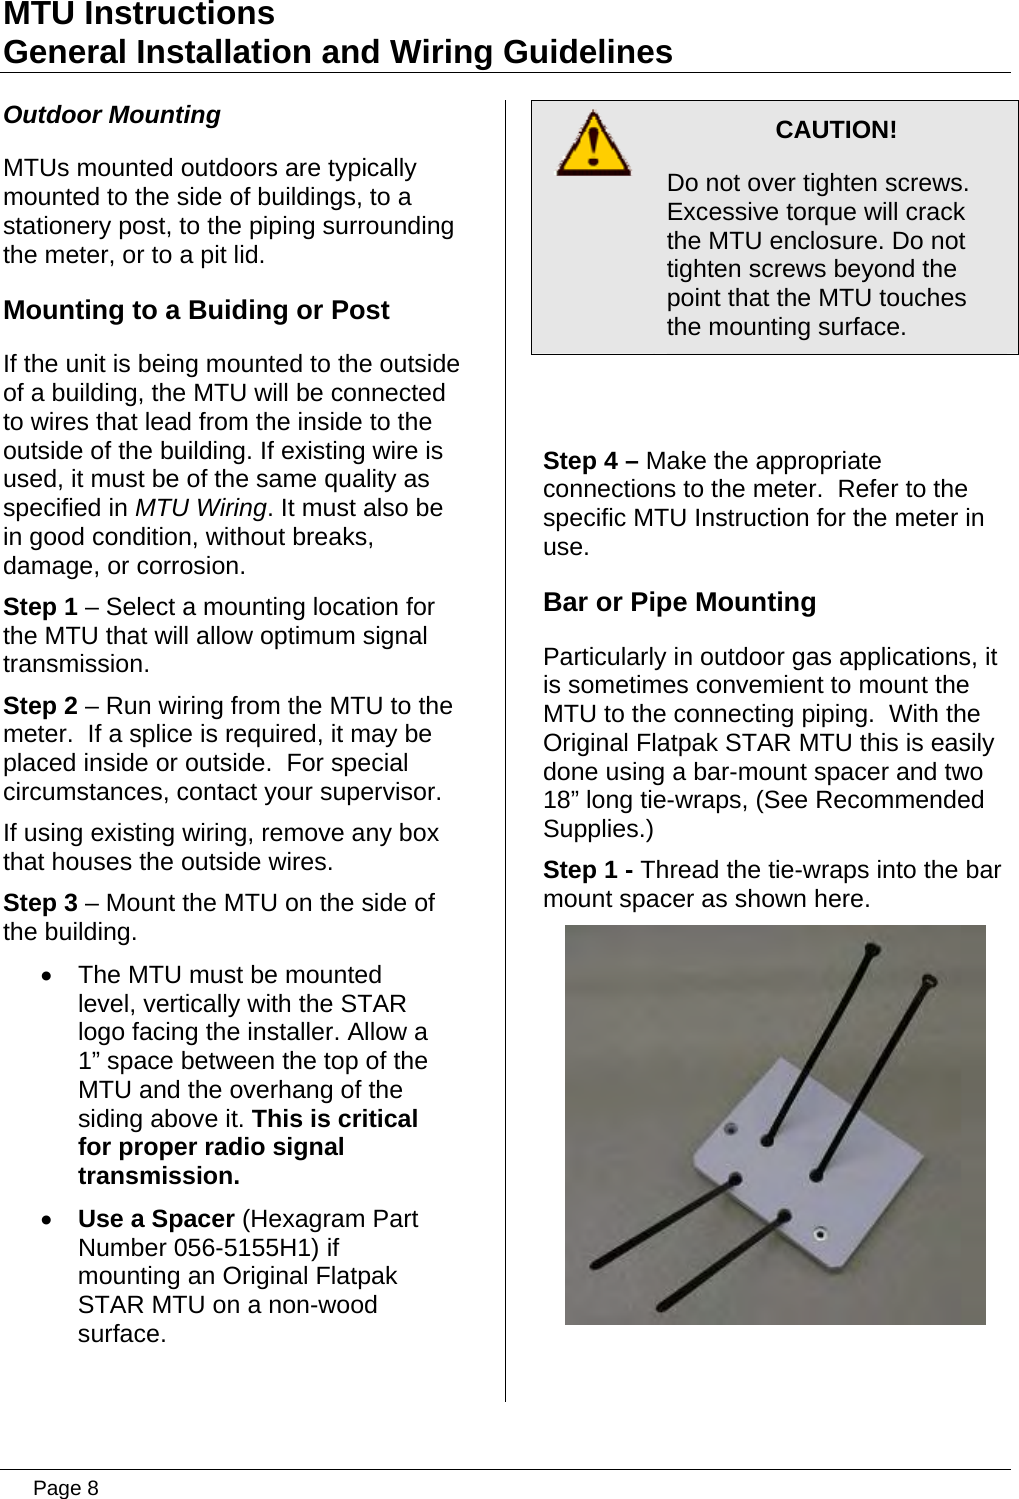 MTU Instructions General Installation and Wiring Guidelines Outdoor Mounting MTUs mounted outdoors are typically mounted to the side of buildings, to a stationery post, to the piping surrounding the meter, or to a pit lid. Mounting to a Buiding or Post If the unit is being mounted to the outside of a building, the MTU will be connected to wires that lead from the inside to the outside of the building. If existing wire is used, it must be of the same quality as specified in MTU Wiring. It must also be in good condition, without breaks, damage, or corrosion. Step 1 – Select a mounting location for the MTU that will allow optimum signal transmission. Step 2 – Run wiring from the MTU to the meter.  If a splice is required, it may be placed inside or outside.  For special circumstances, contact your supervisor. If using existing wiring, remove any box that houses the outside wires. Step 3 – Mount the MTU on the side of the building. •  The MTU must be mounted level, vertically with the STAR logo facing the installer. Allow a 1” space between the top of the MTU and the overhang of the siding above it. This is critical for proper radio signal transmission. • Use a Spacer (Hexagram Part Number 056-5155H1) if mounting an Original Flatpak STAR MTU on a non-wood surface.   CAUTION! Do not over tighten screws. Excessive torque will crack the MTU enclosure. Do not tighten screws beyond the point that the MTU touches the mounting surface.  Step 4 – Make the appropriate connections to the meter.  Refer to the specific MTU Instruction for the meter in use. Bar or Pipe Mounting Particularly in outdoor gas applications, it is sometimes convemient to mount the MTU to the connecting piping.  With the Original Flatpak STAR MTU this is easily done using a bar-mount spacer and two 18” long tie-wraps, (See Recommended Supplies.) Step 1 - Thread the tie-wraps into the bar mount spacer as shown here.    Page 8